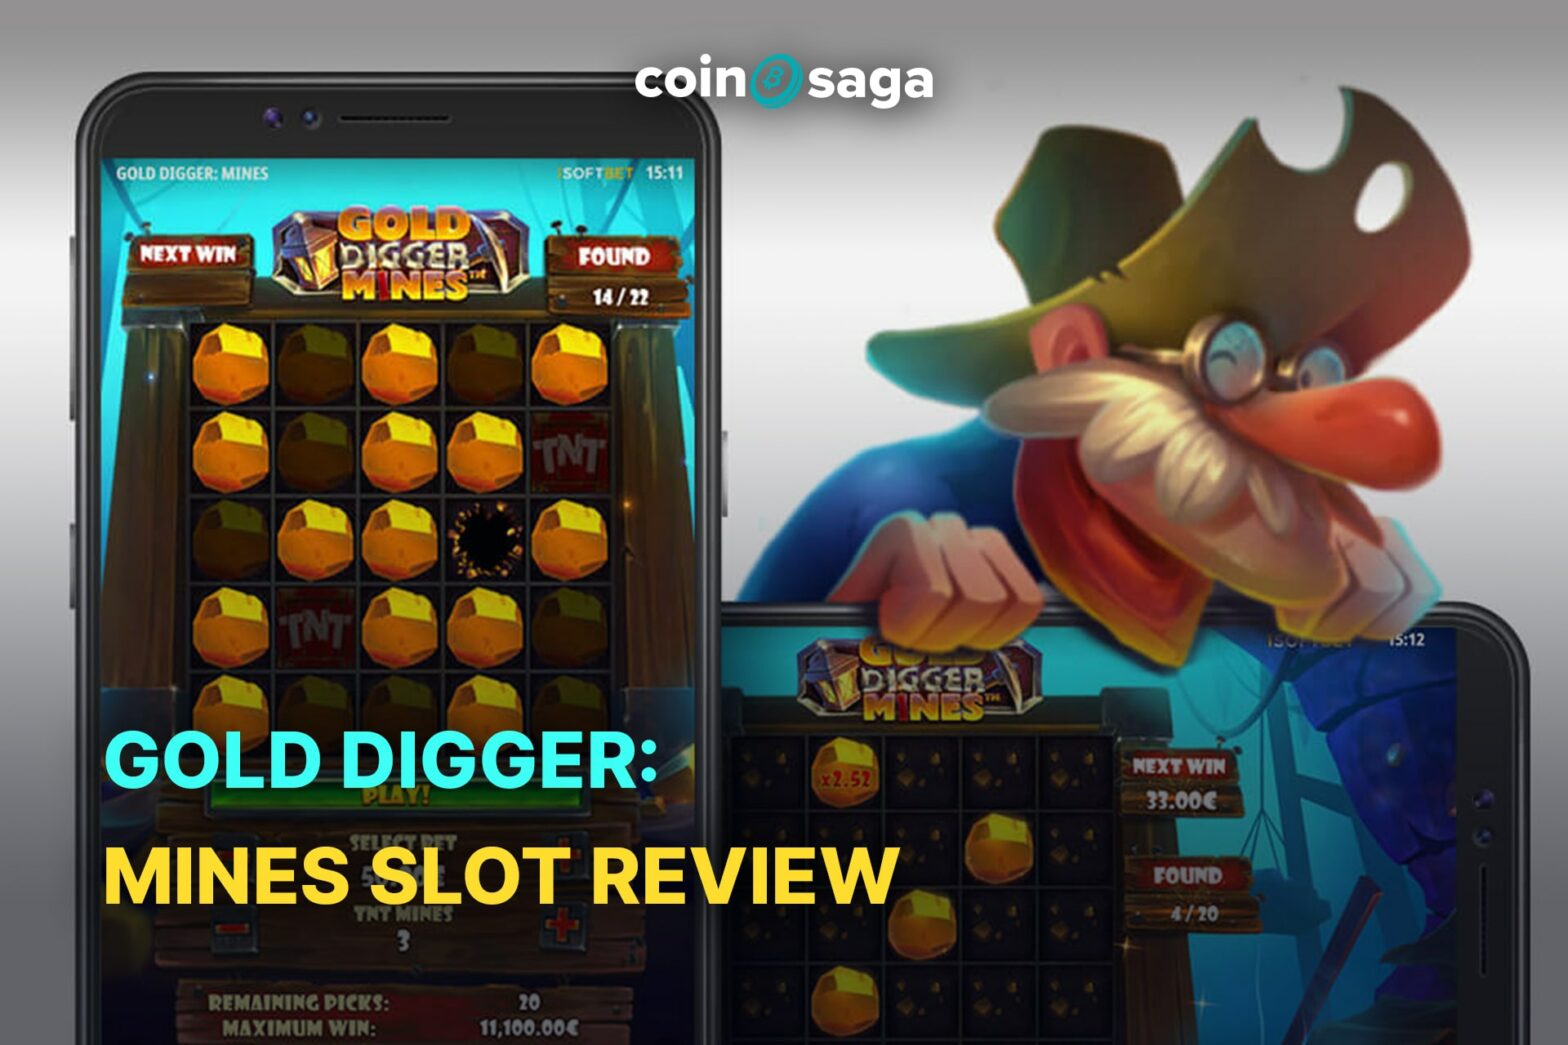 Gold Digger Mines Slot Review (iSoftbet)